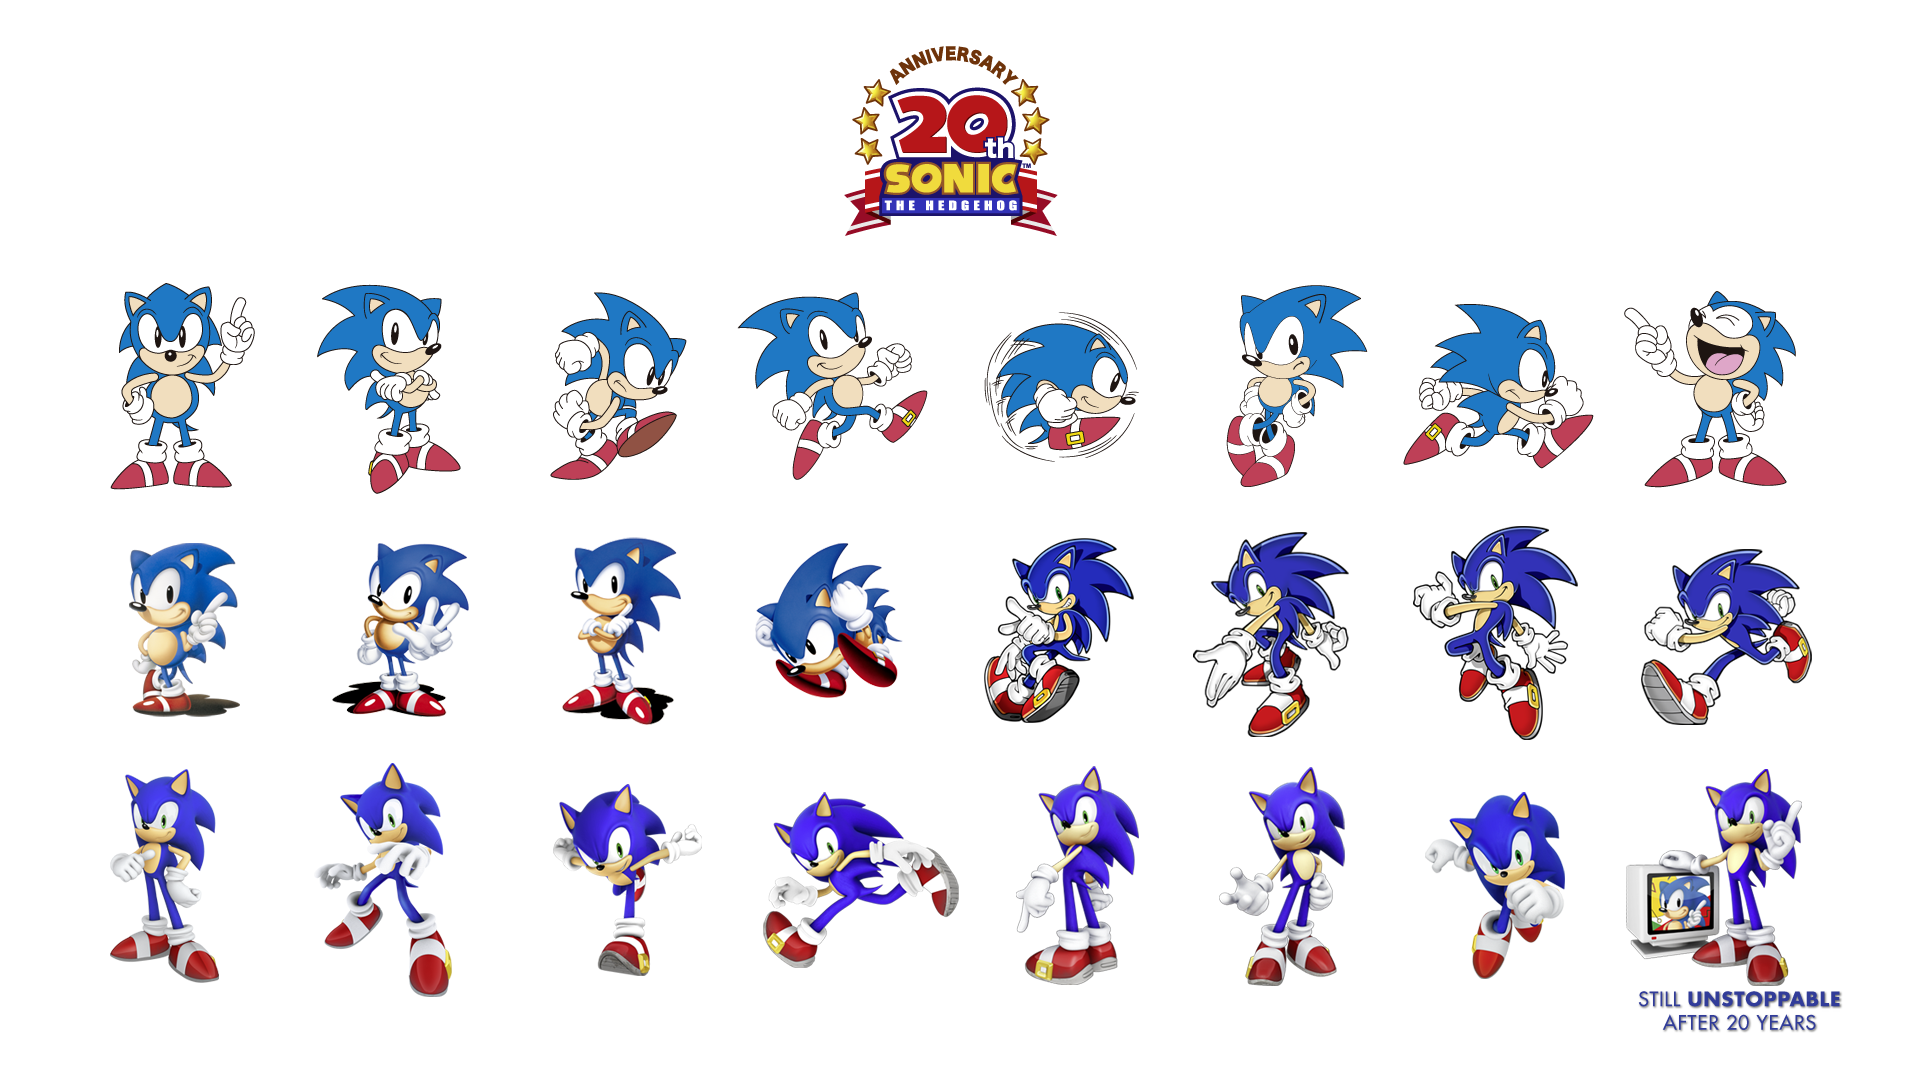 sonic generations background